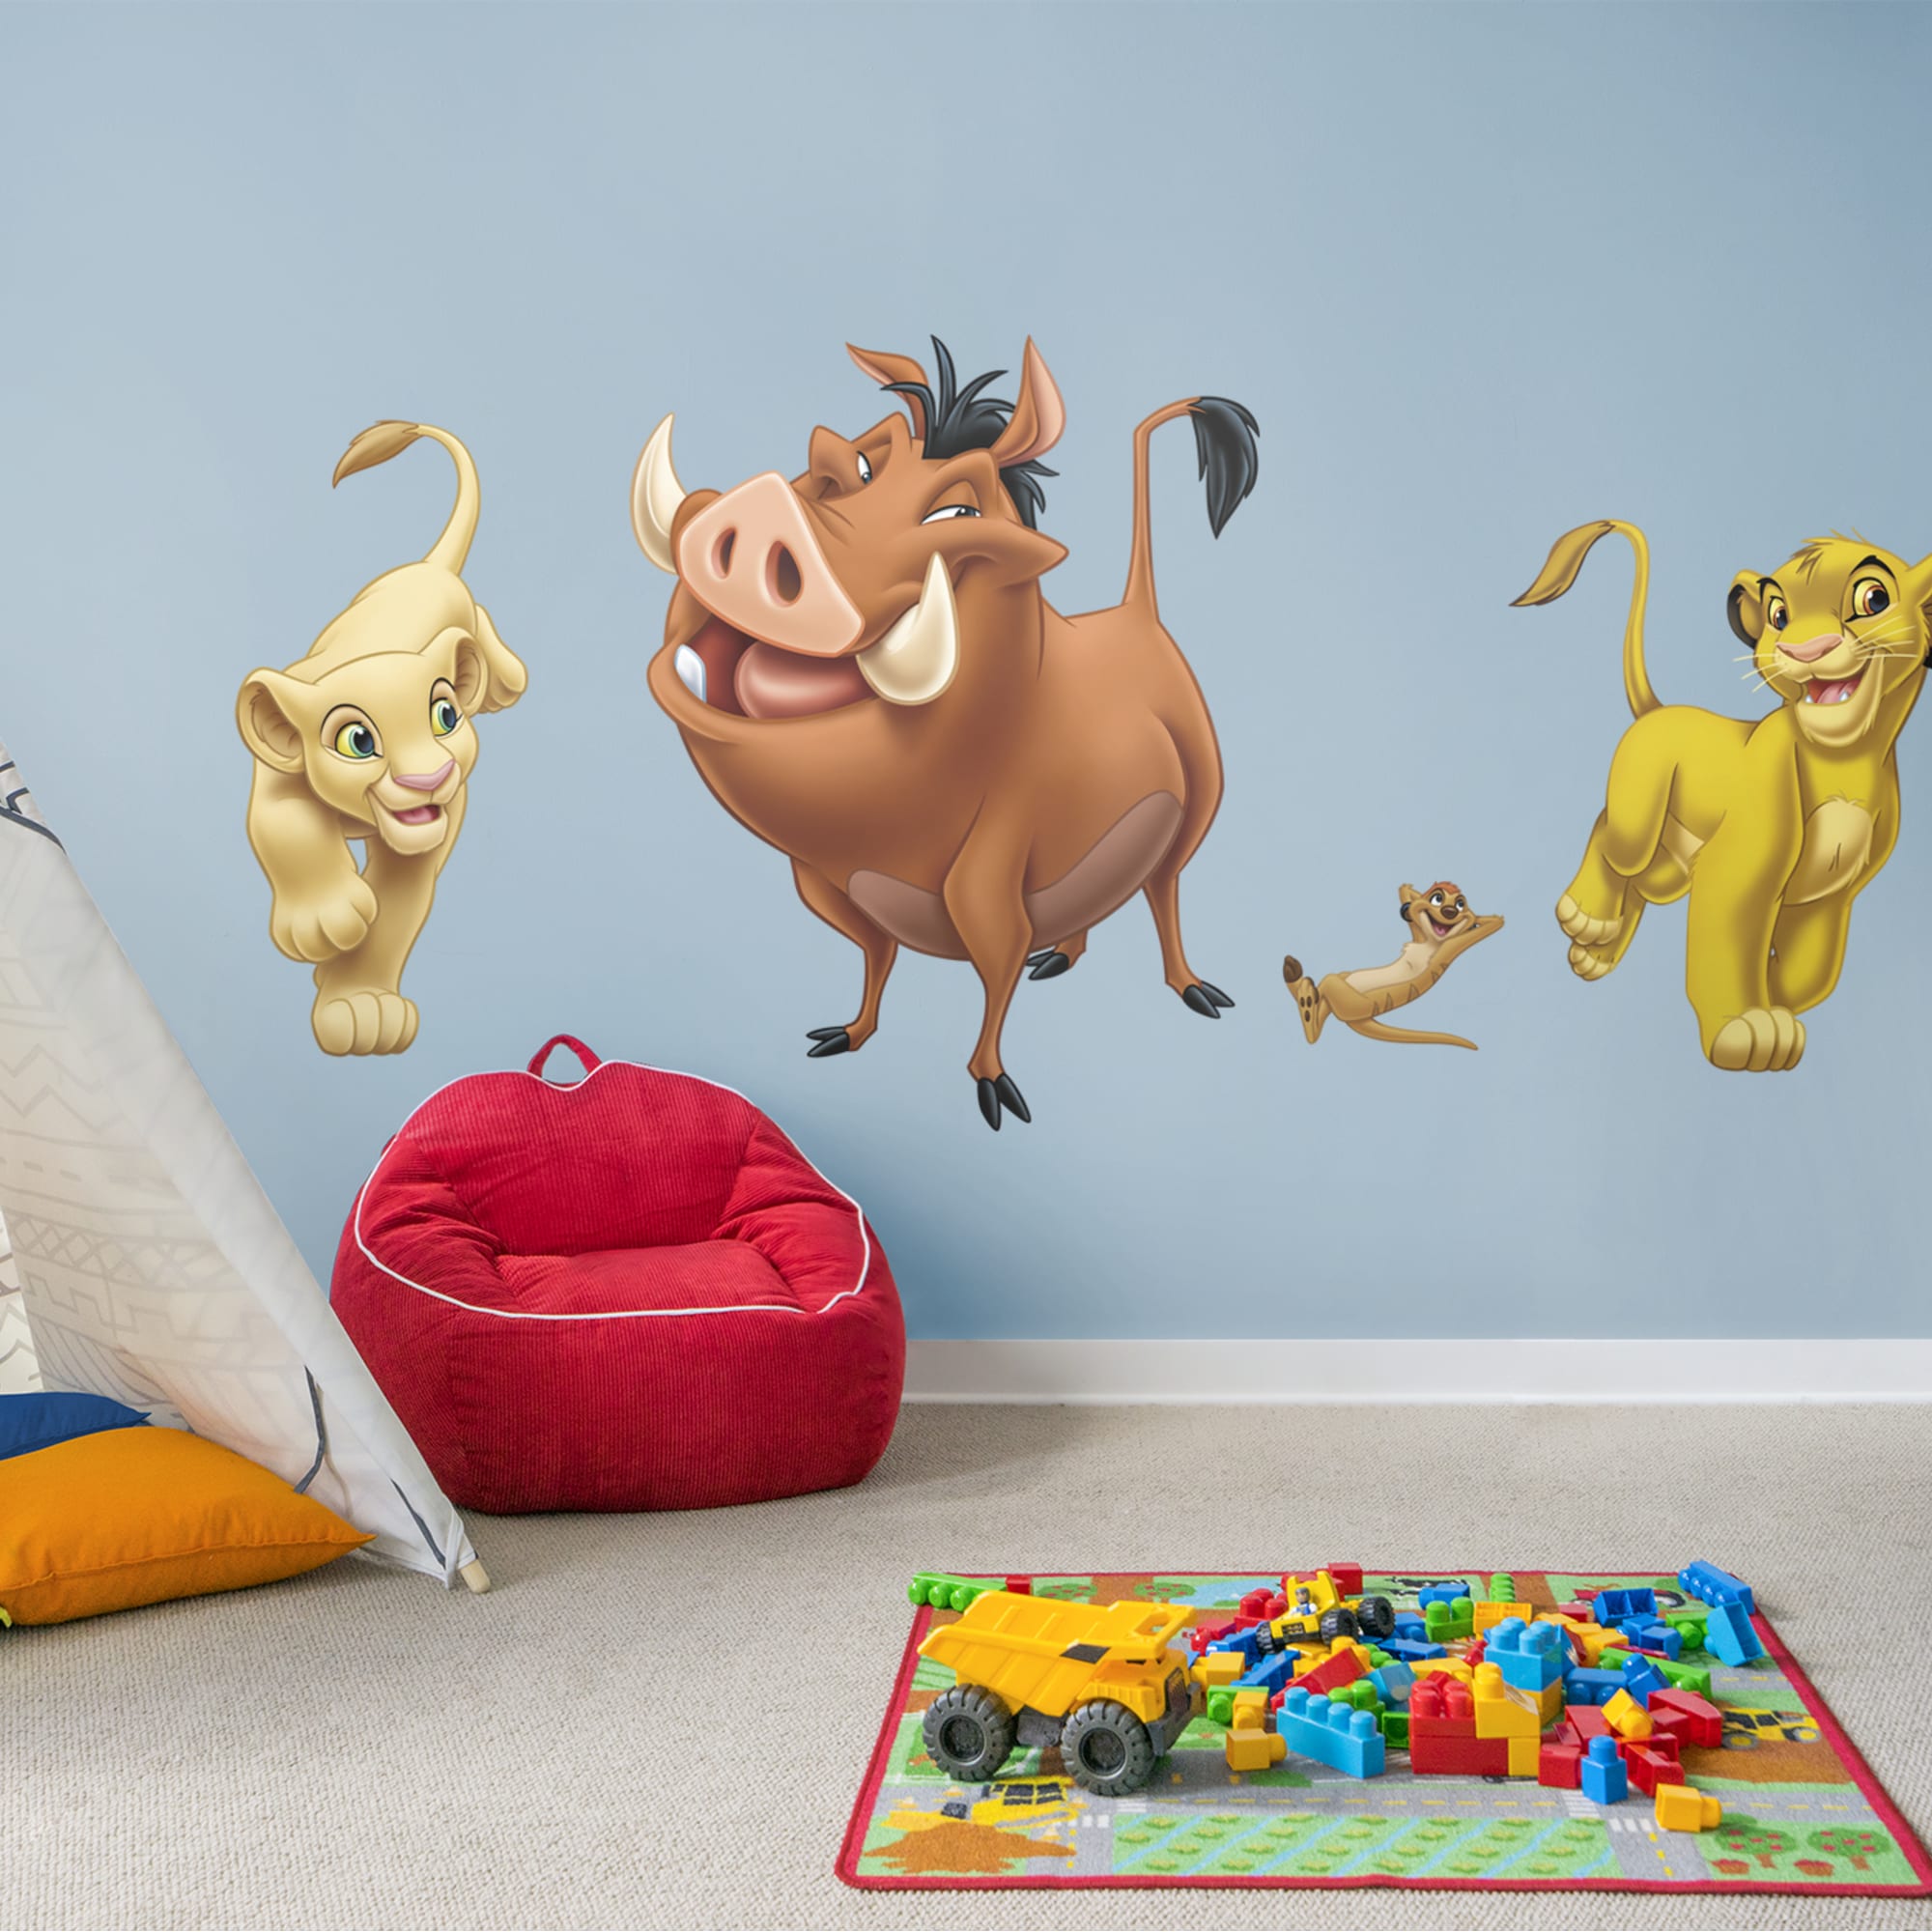 The Lion King: Collection - Officially Licensed Disney Removable Wall Decals 49.5"W x 79.0"H by Fathead | Vinyl